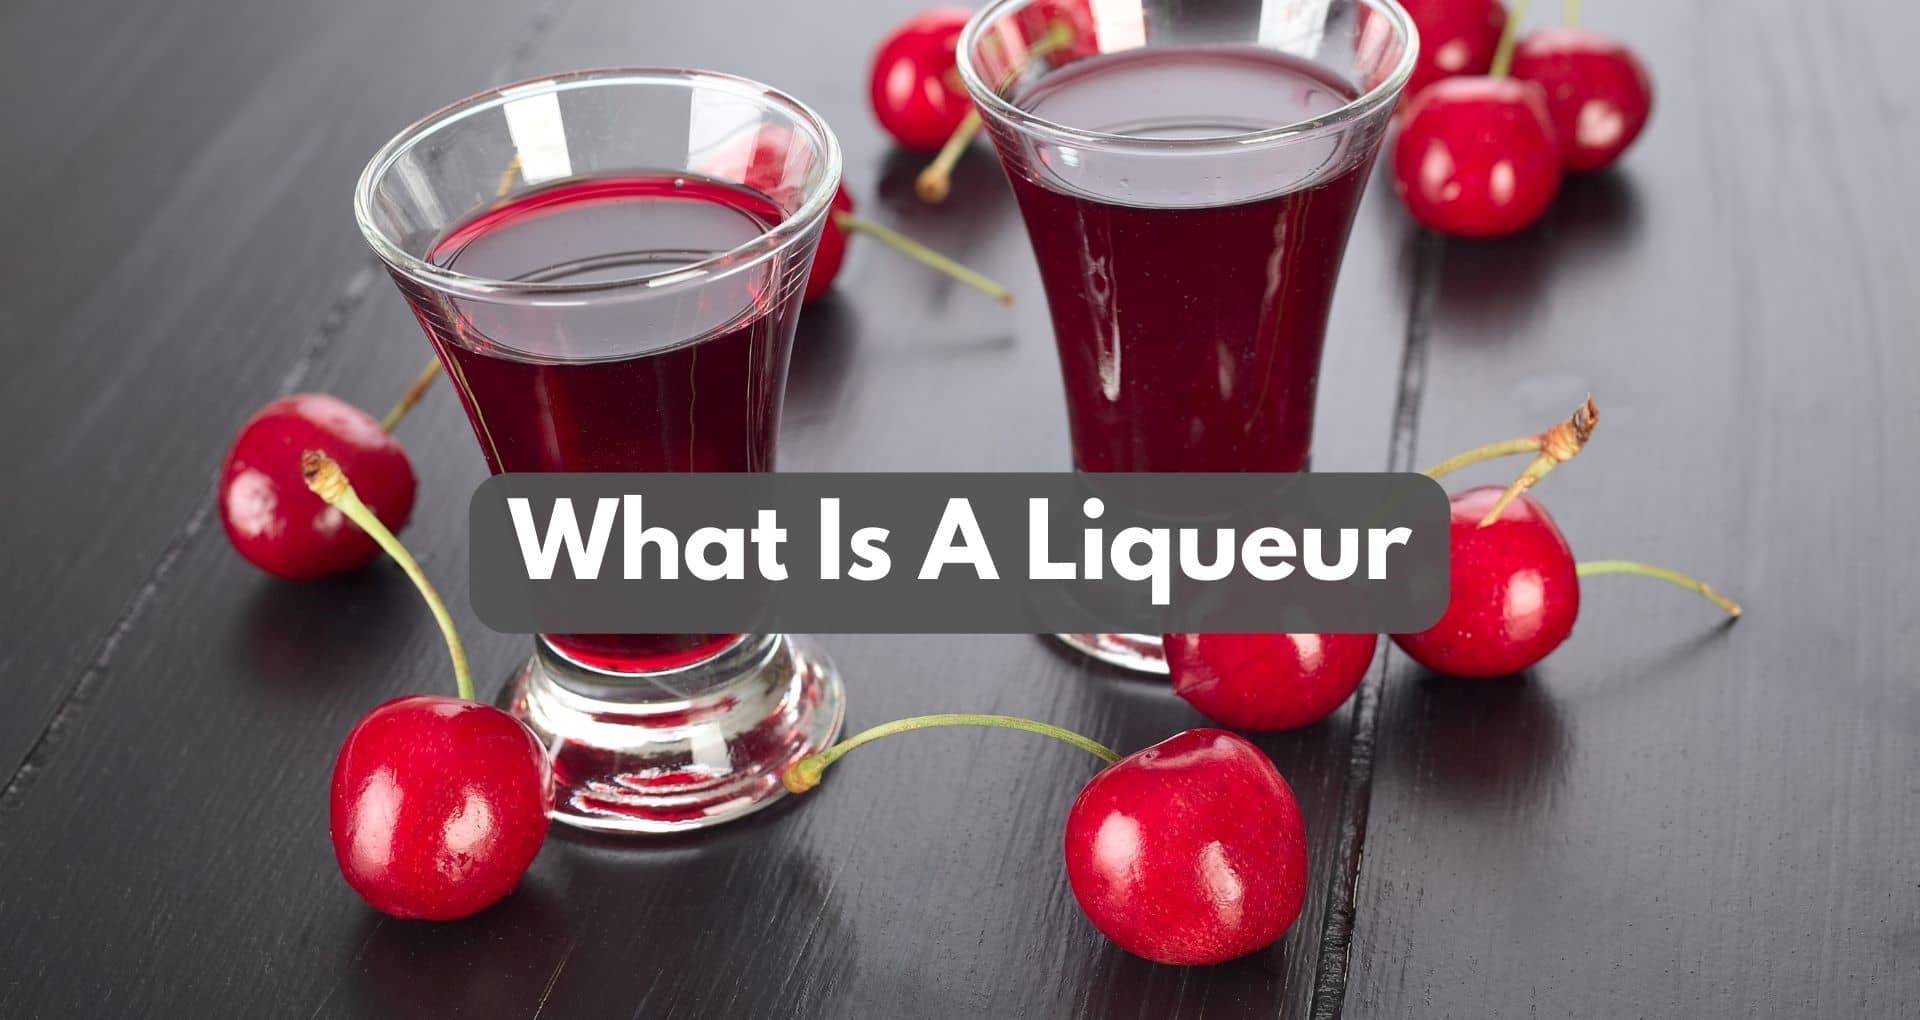 What Is A Liqueur? Definition And Characteristics